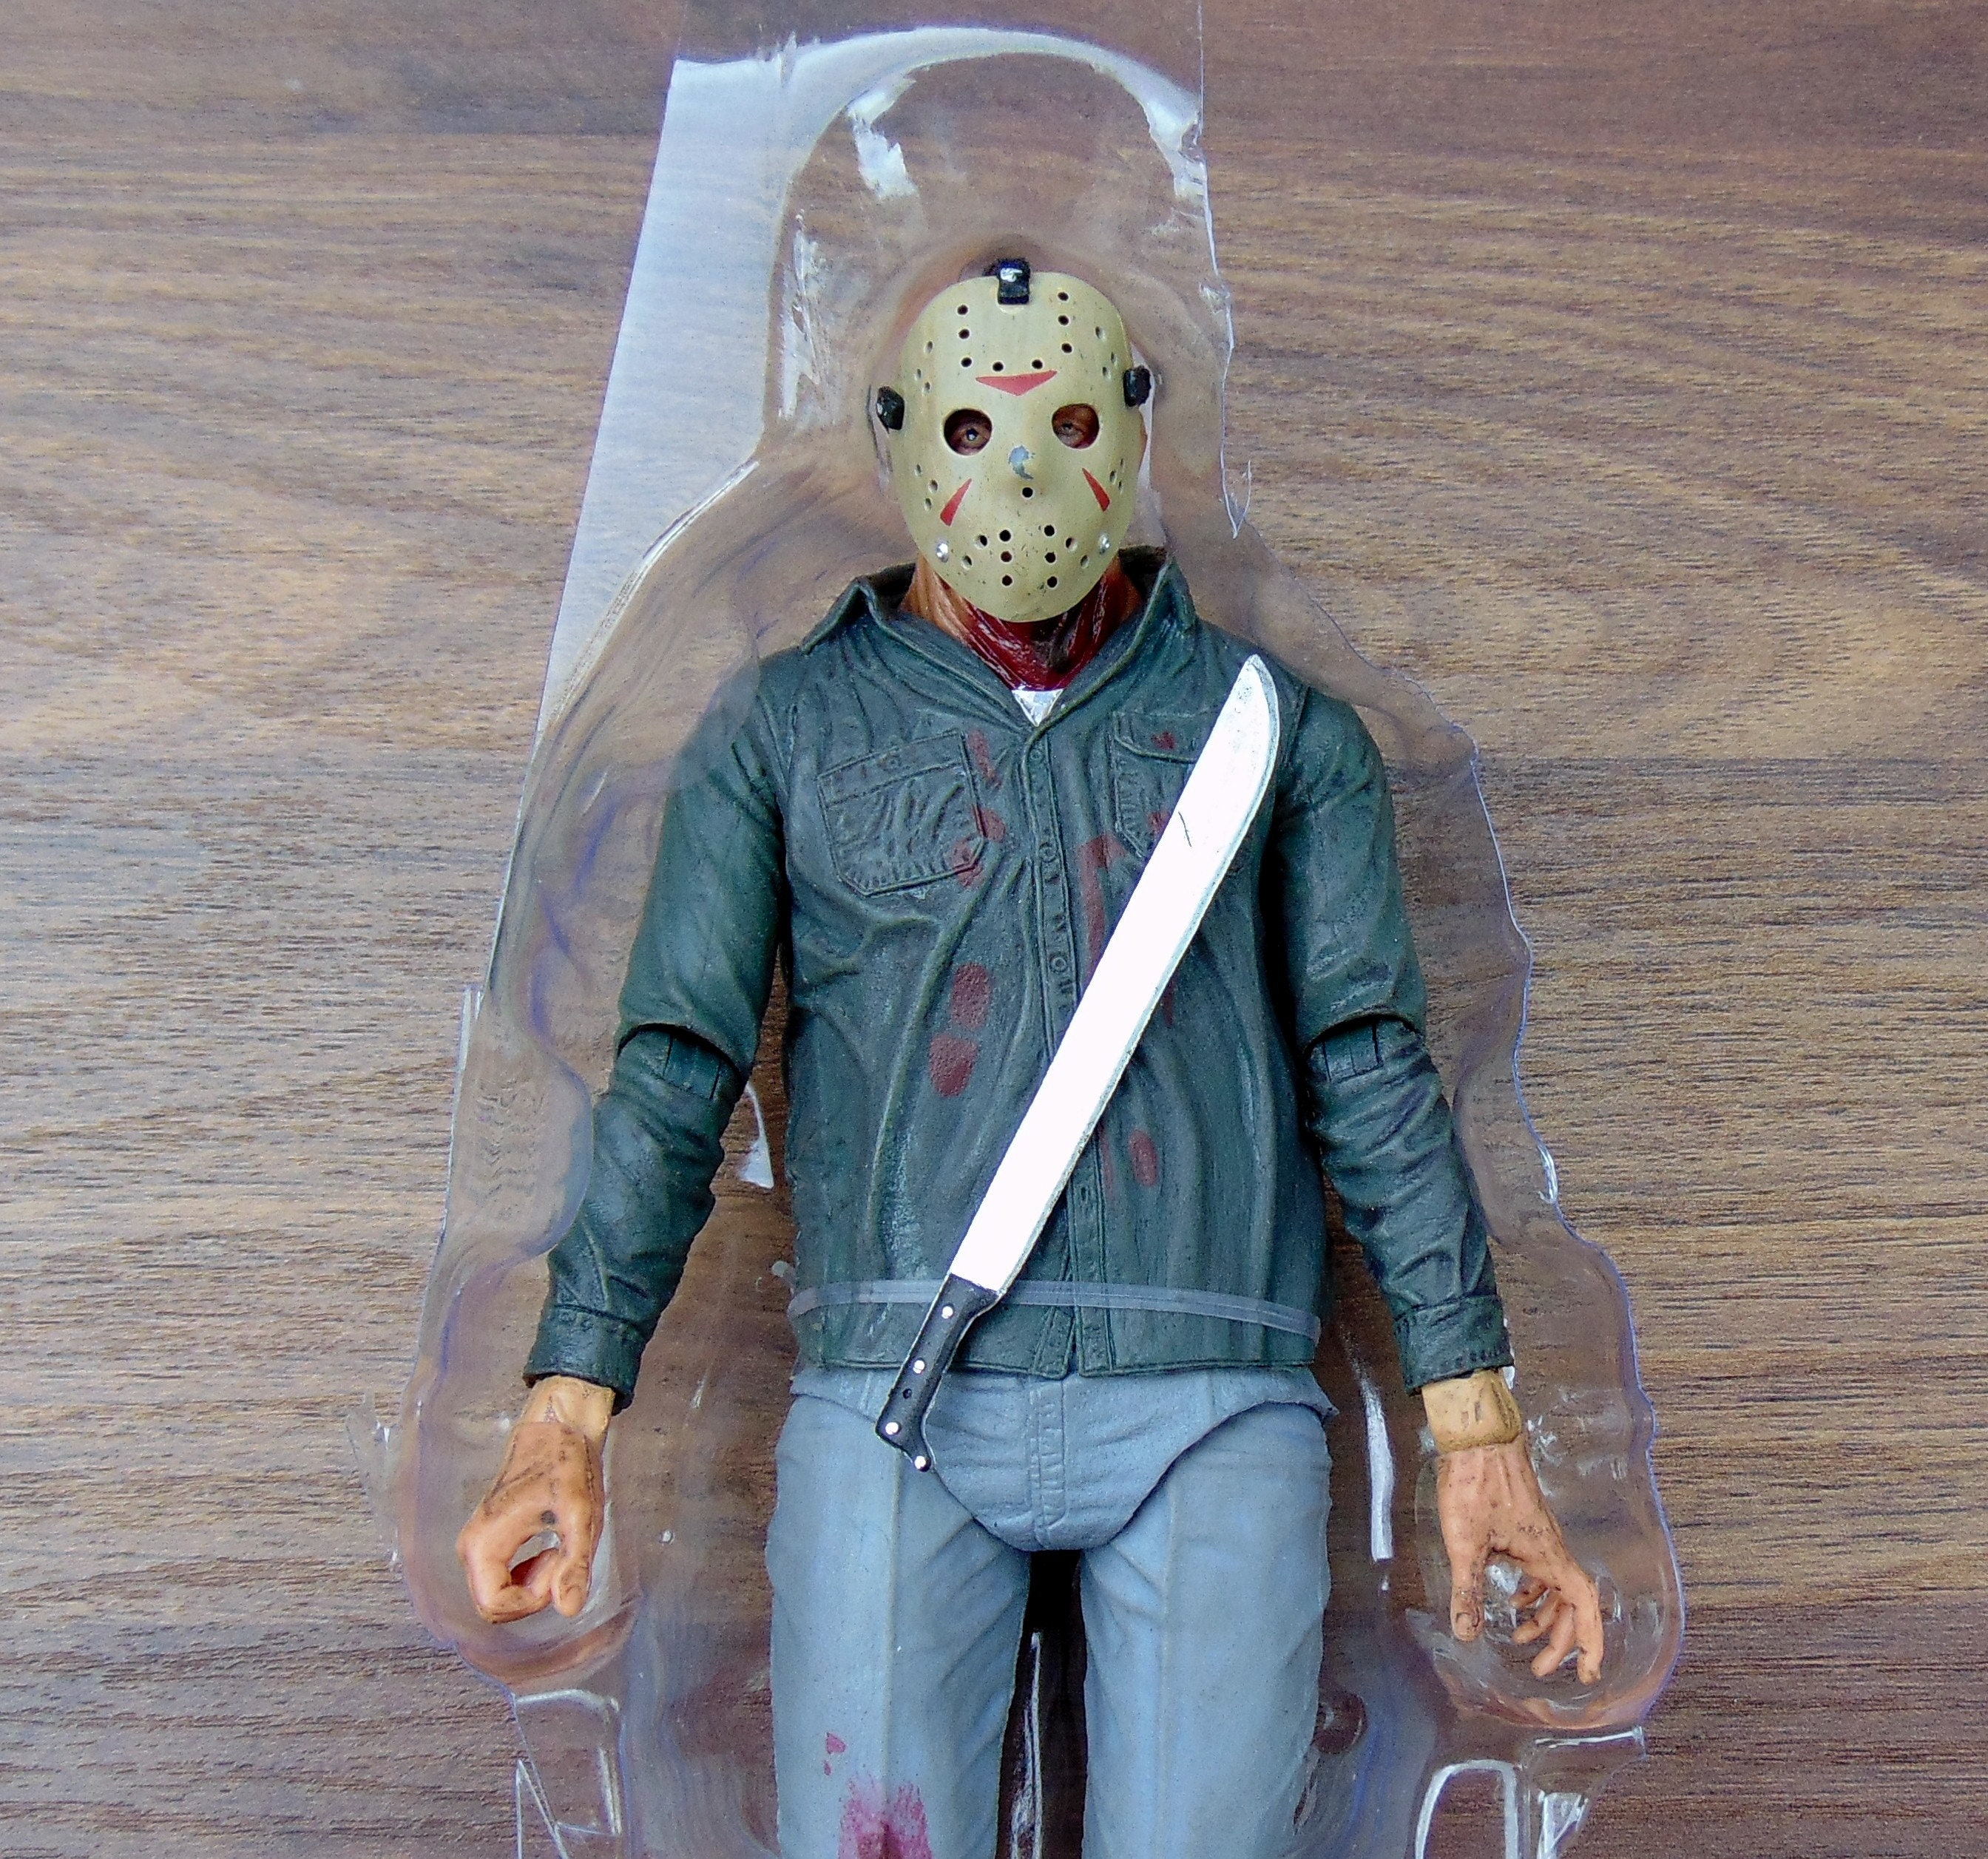 NECA HORROR FIGURE - 8” Retro Clothed FRIDAY THE 13TH Part 3 3D PAMELA  VOORHEES